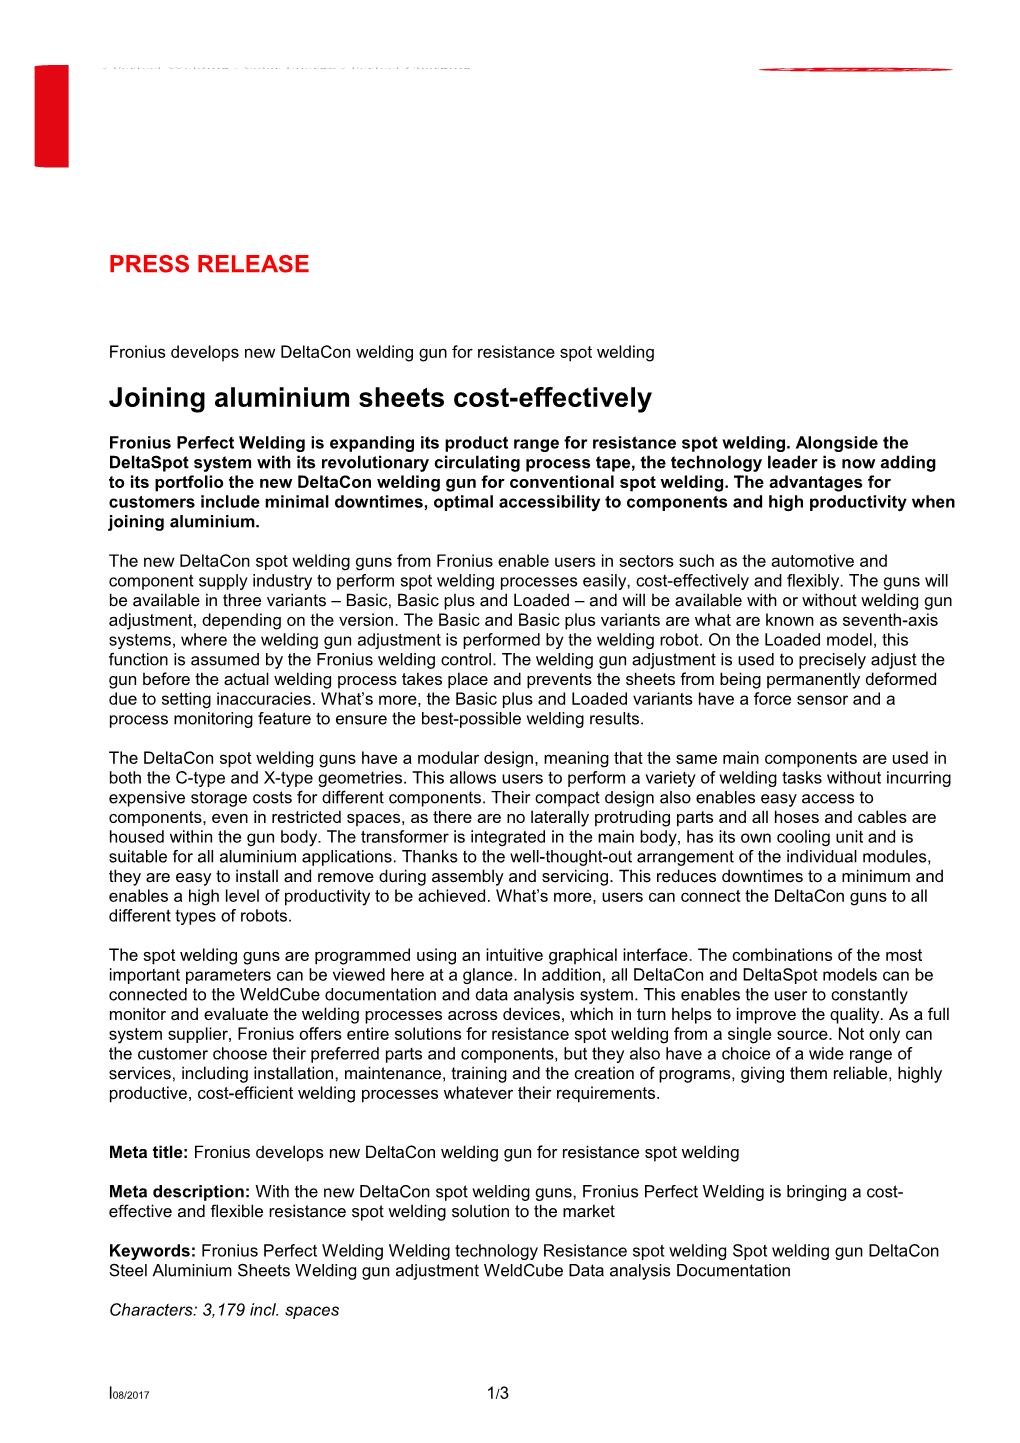 Joining Aluminium Sheets Cost-Effectively